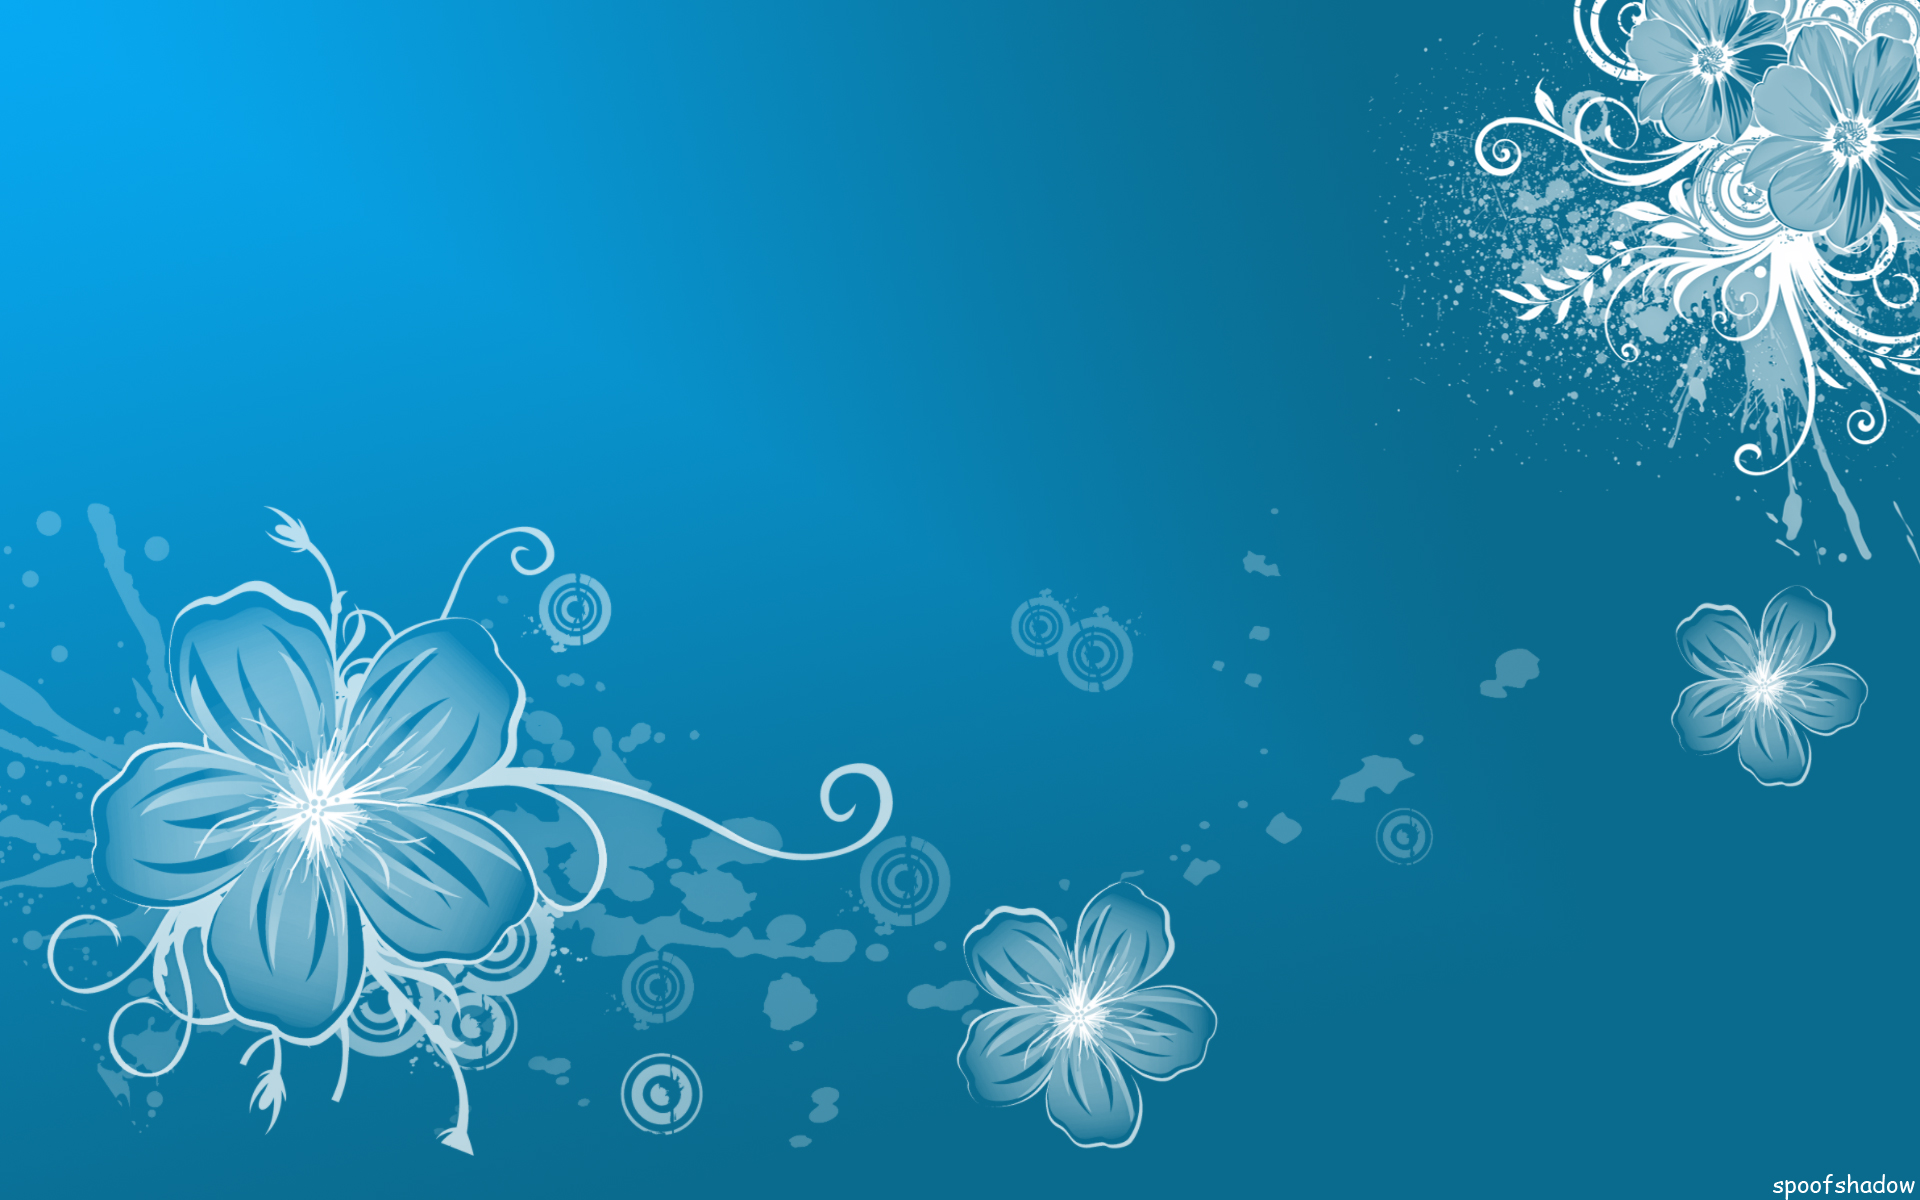 Splash of spring Backgrounds powerpoint backgrounds